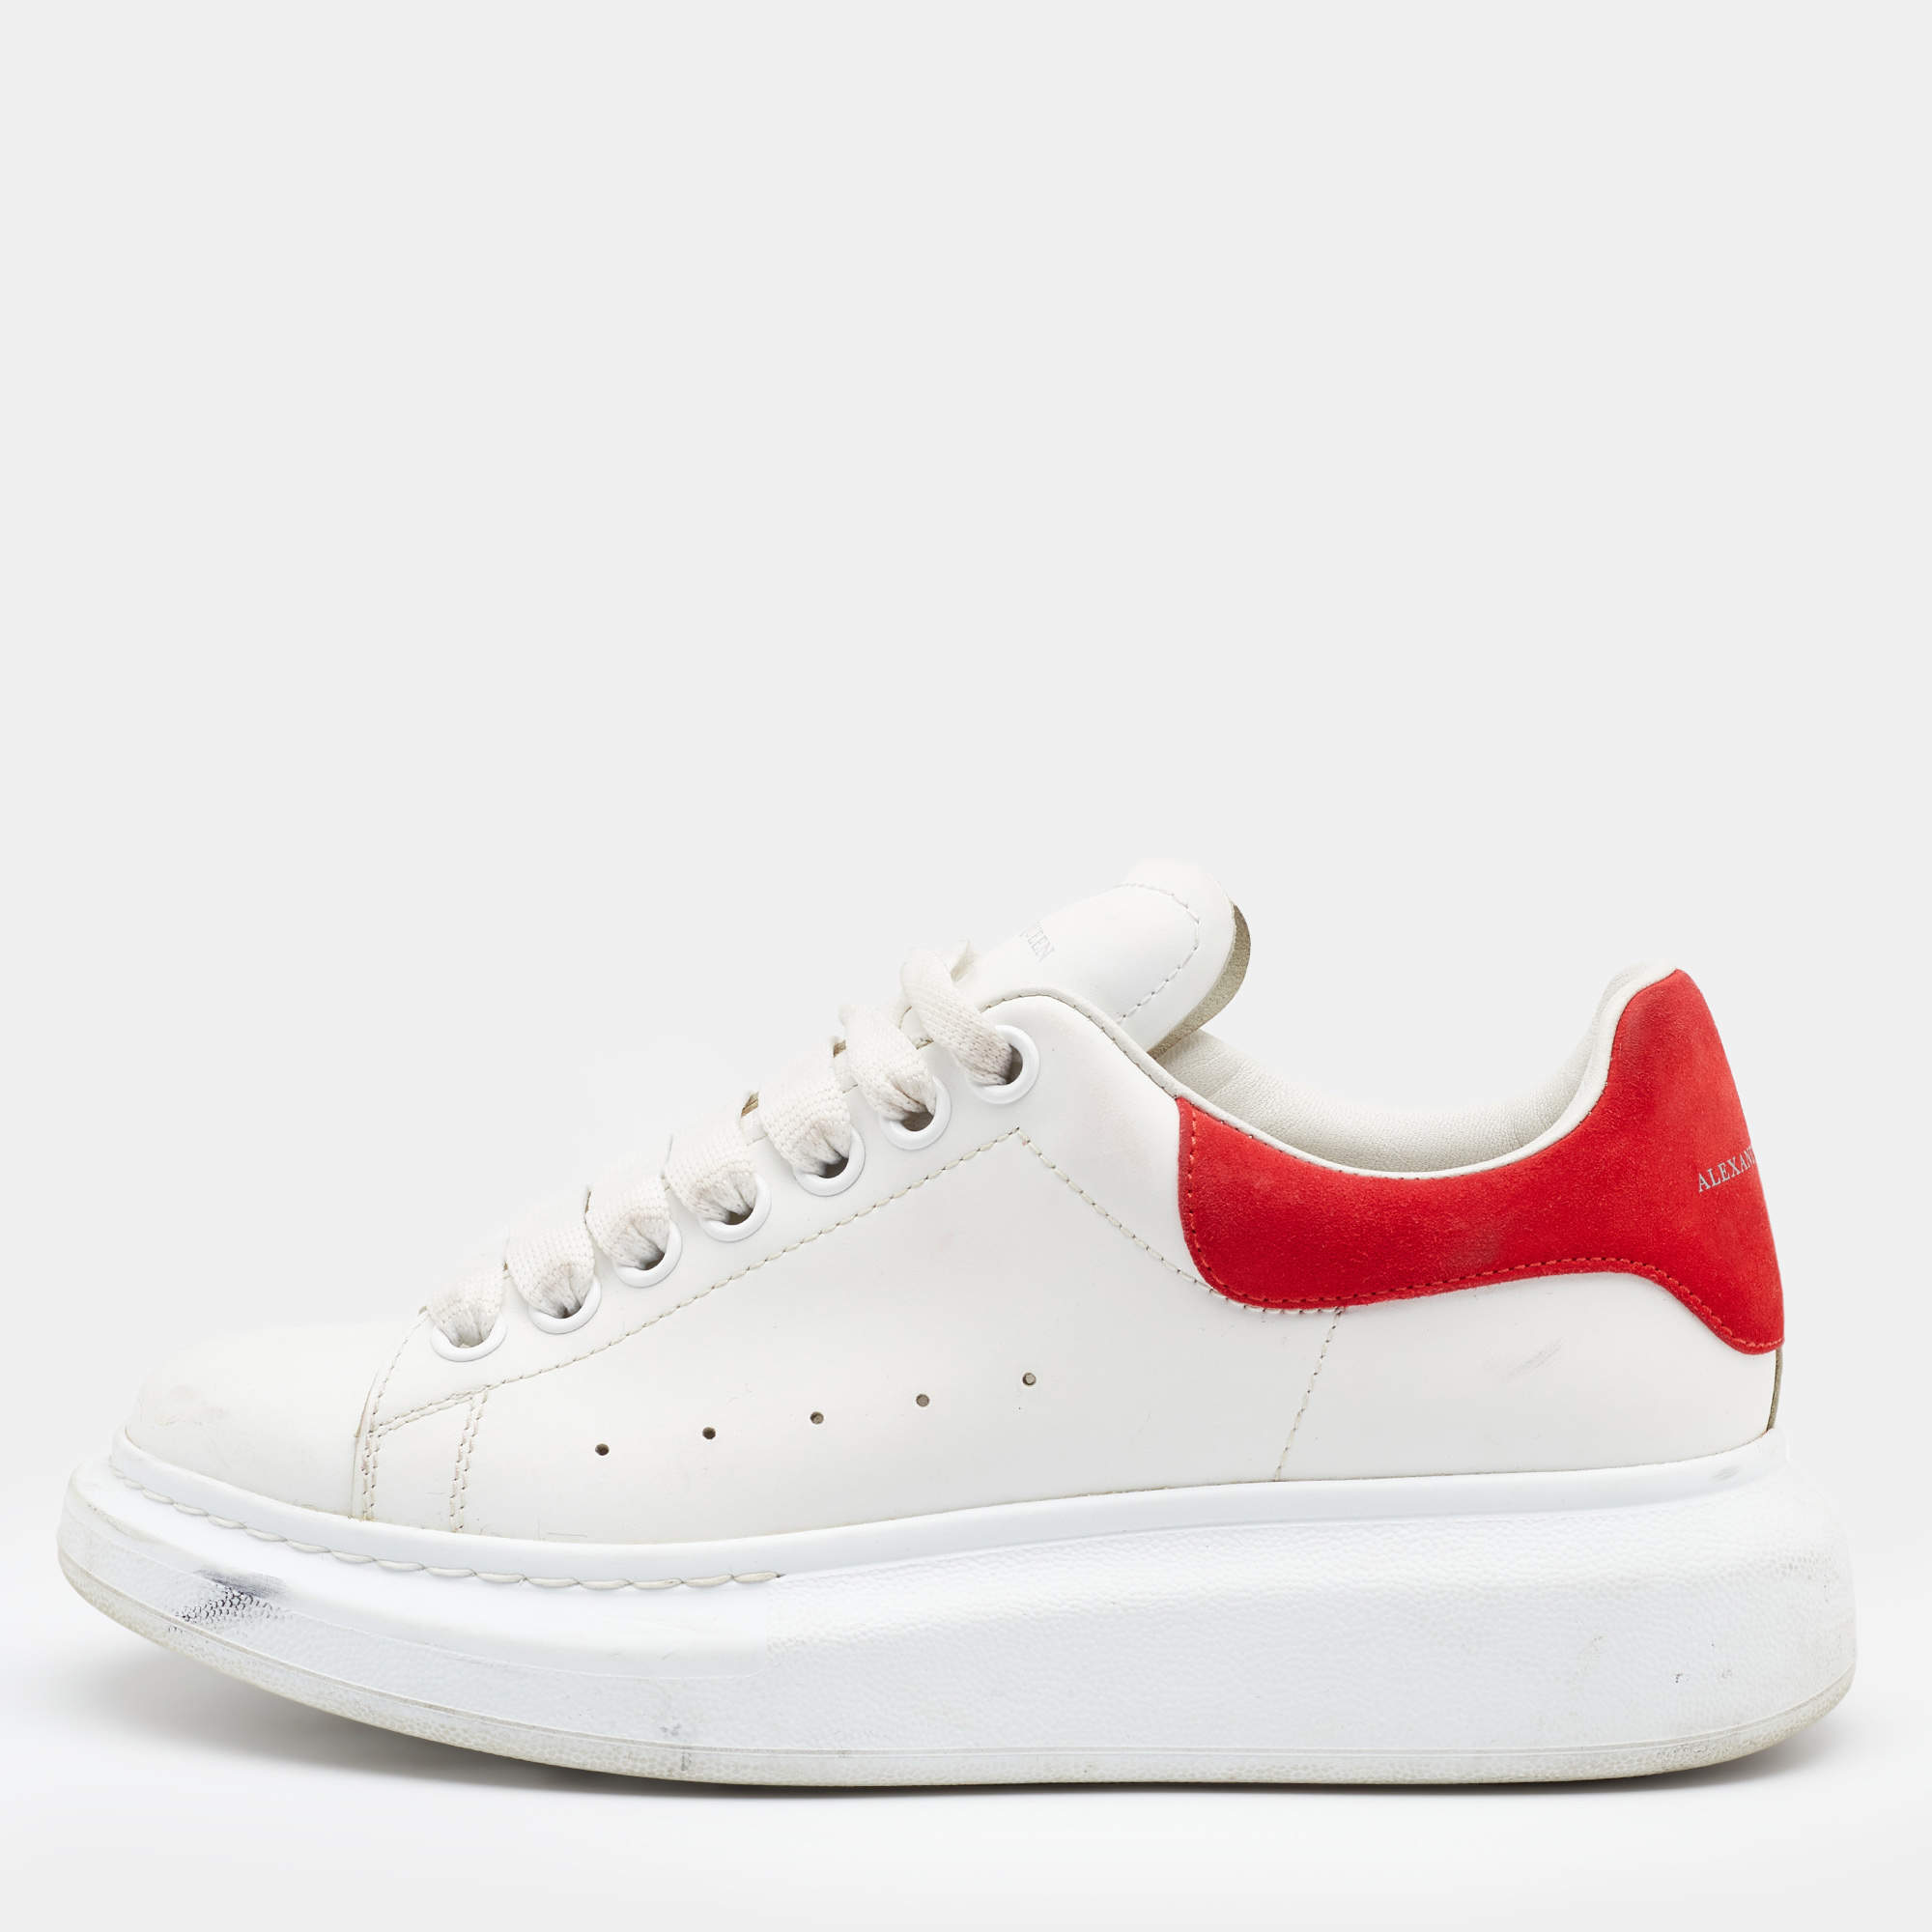 Alexander McQueen White/Red Leather and Suede Oversized Low Top Sneakers Size 38